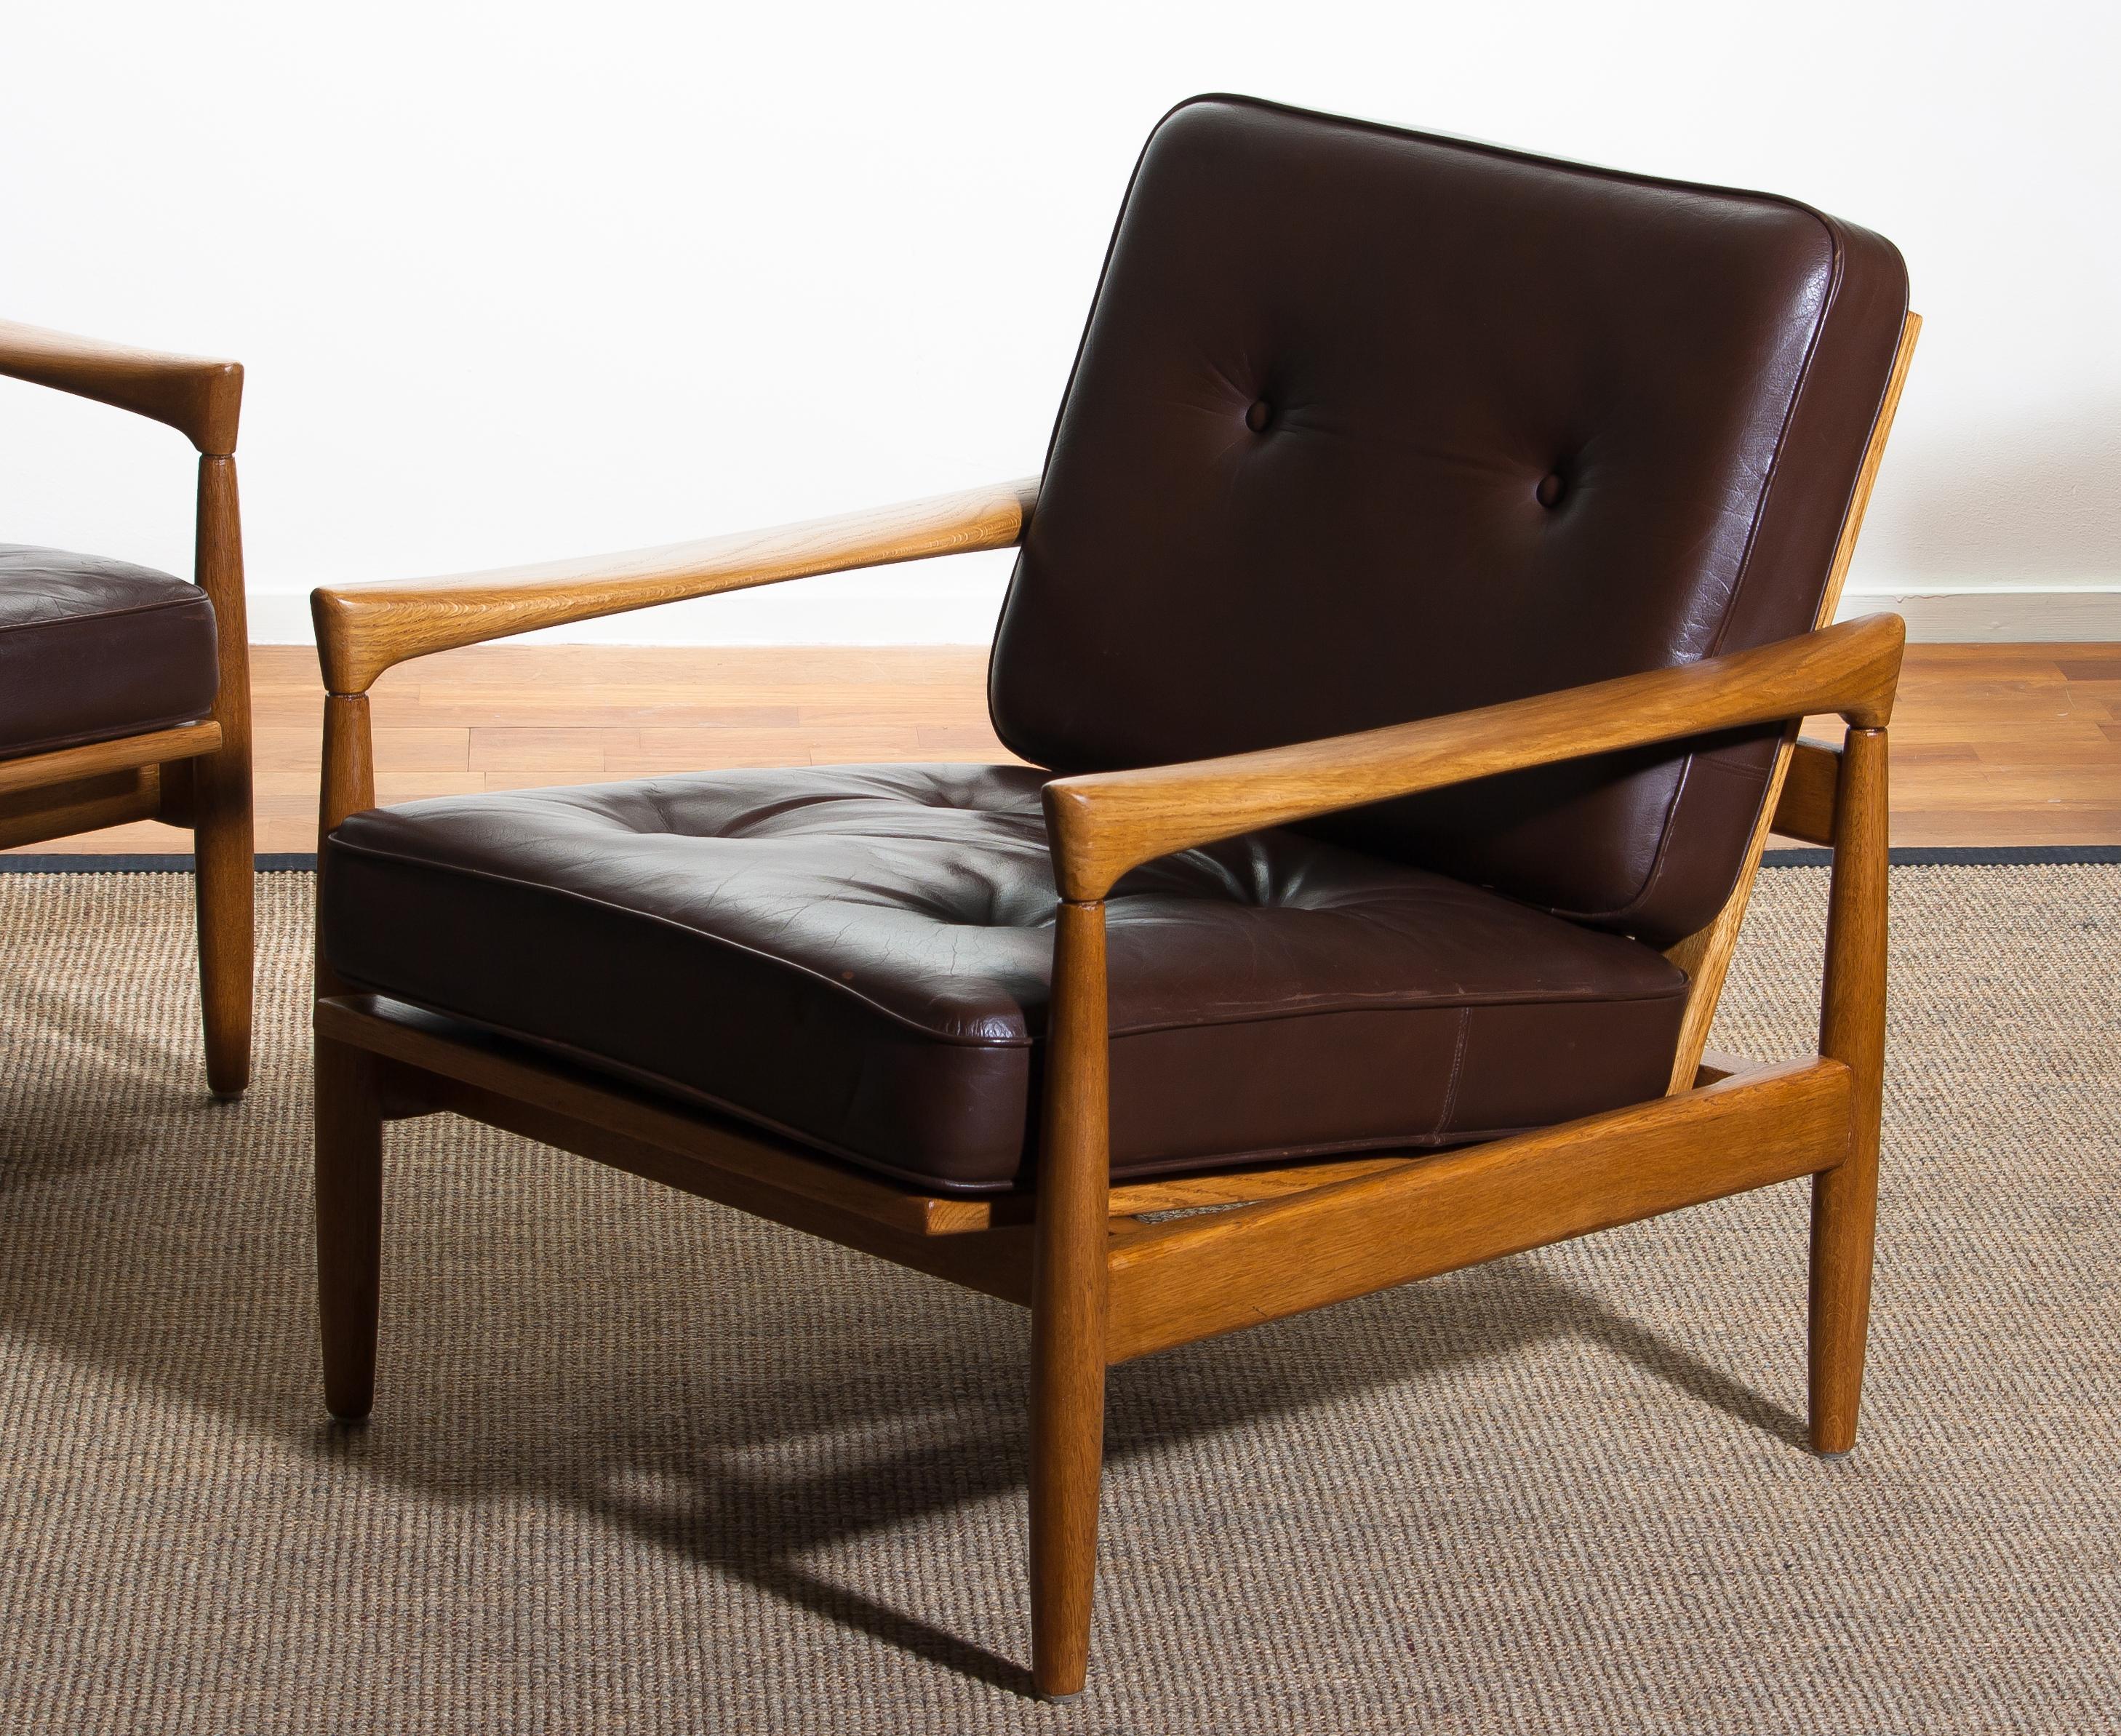 1960s, Set of Two Oak and Brown Leather Easy or Lounge Chairs by Erik Wörtz (Moderne der Mitte des Jahrhunderts)